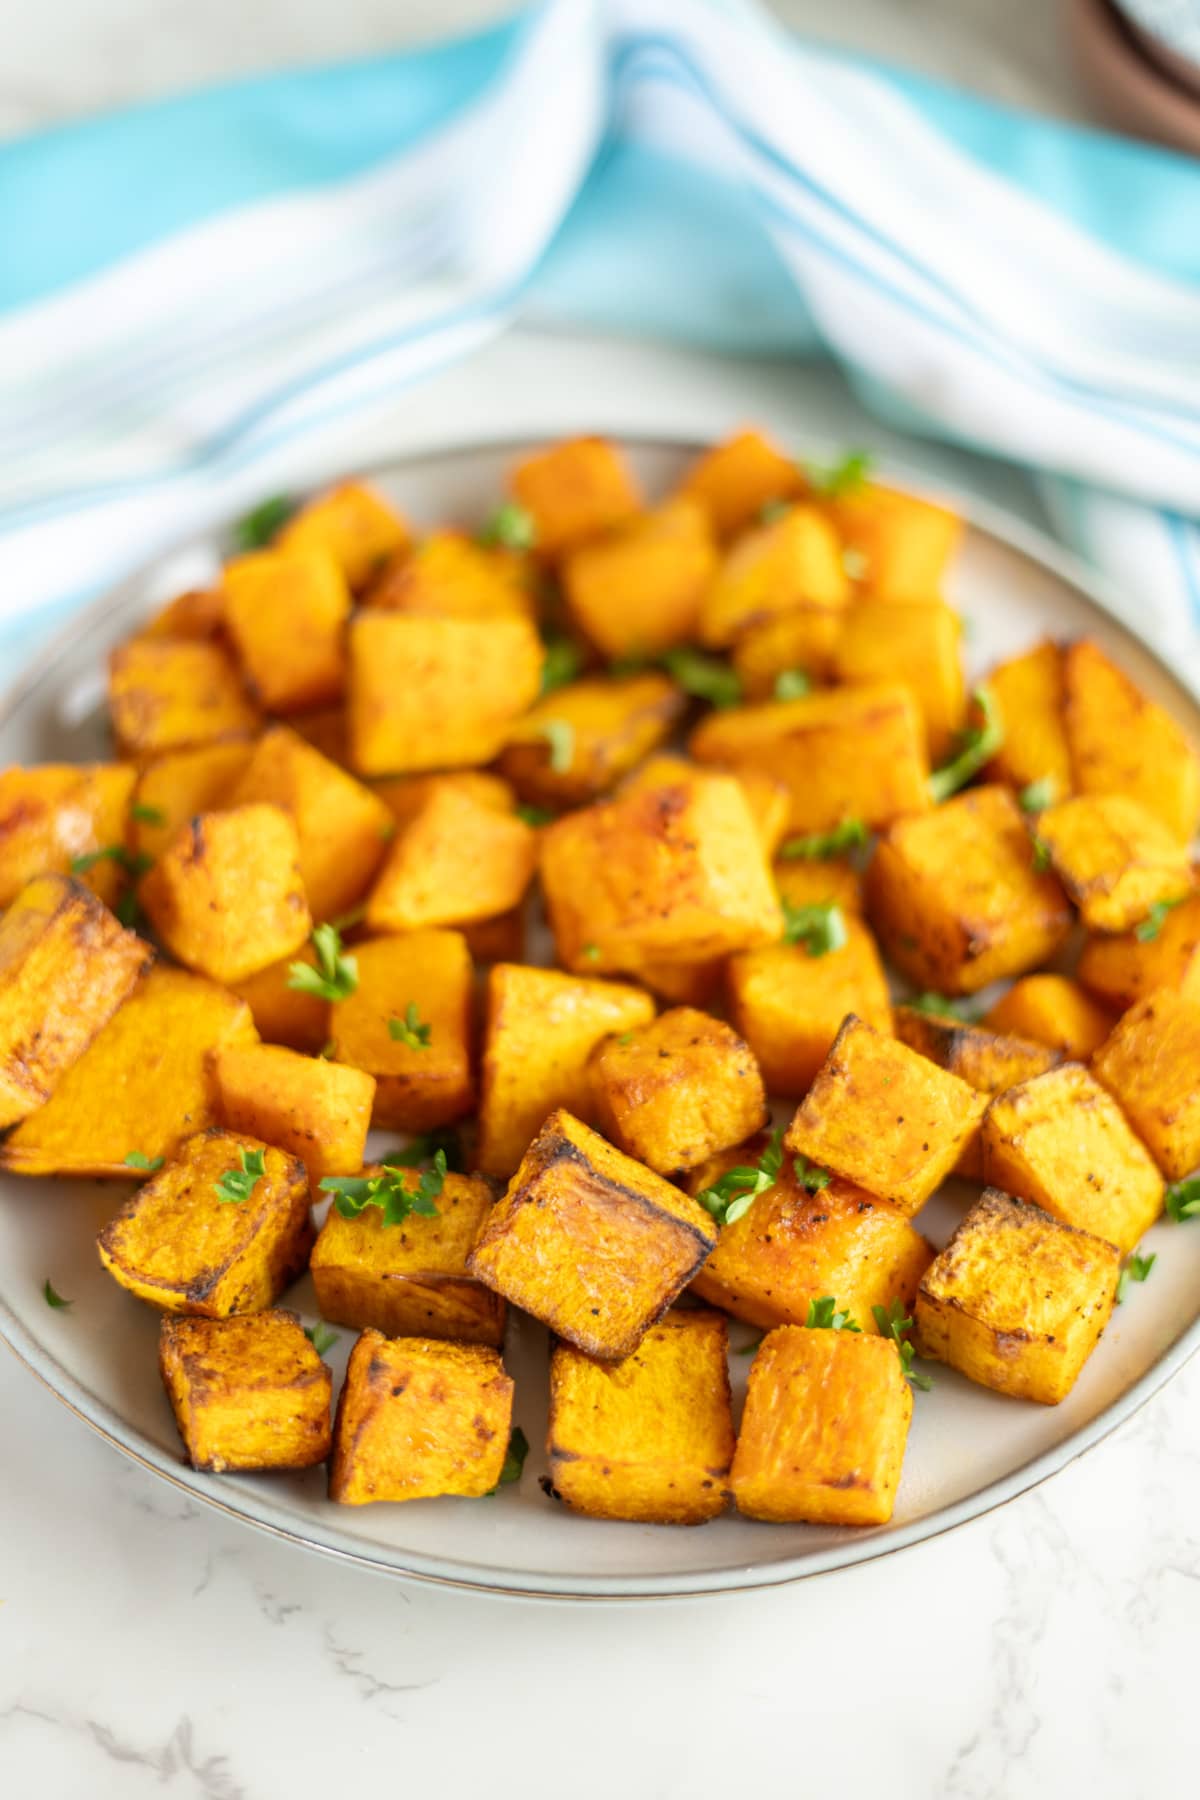 Roasted butternut squash cubes on a plate.